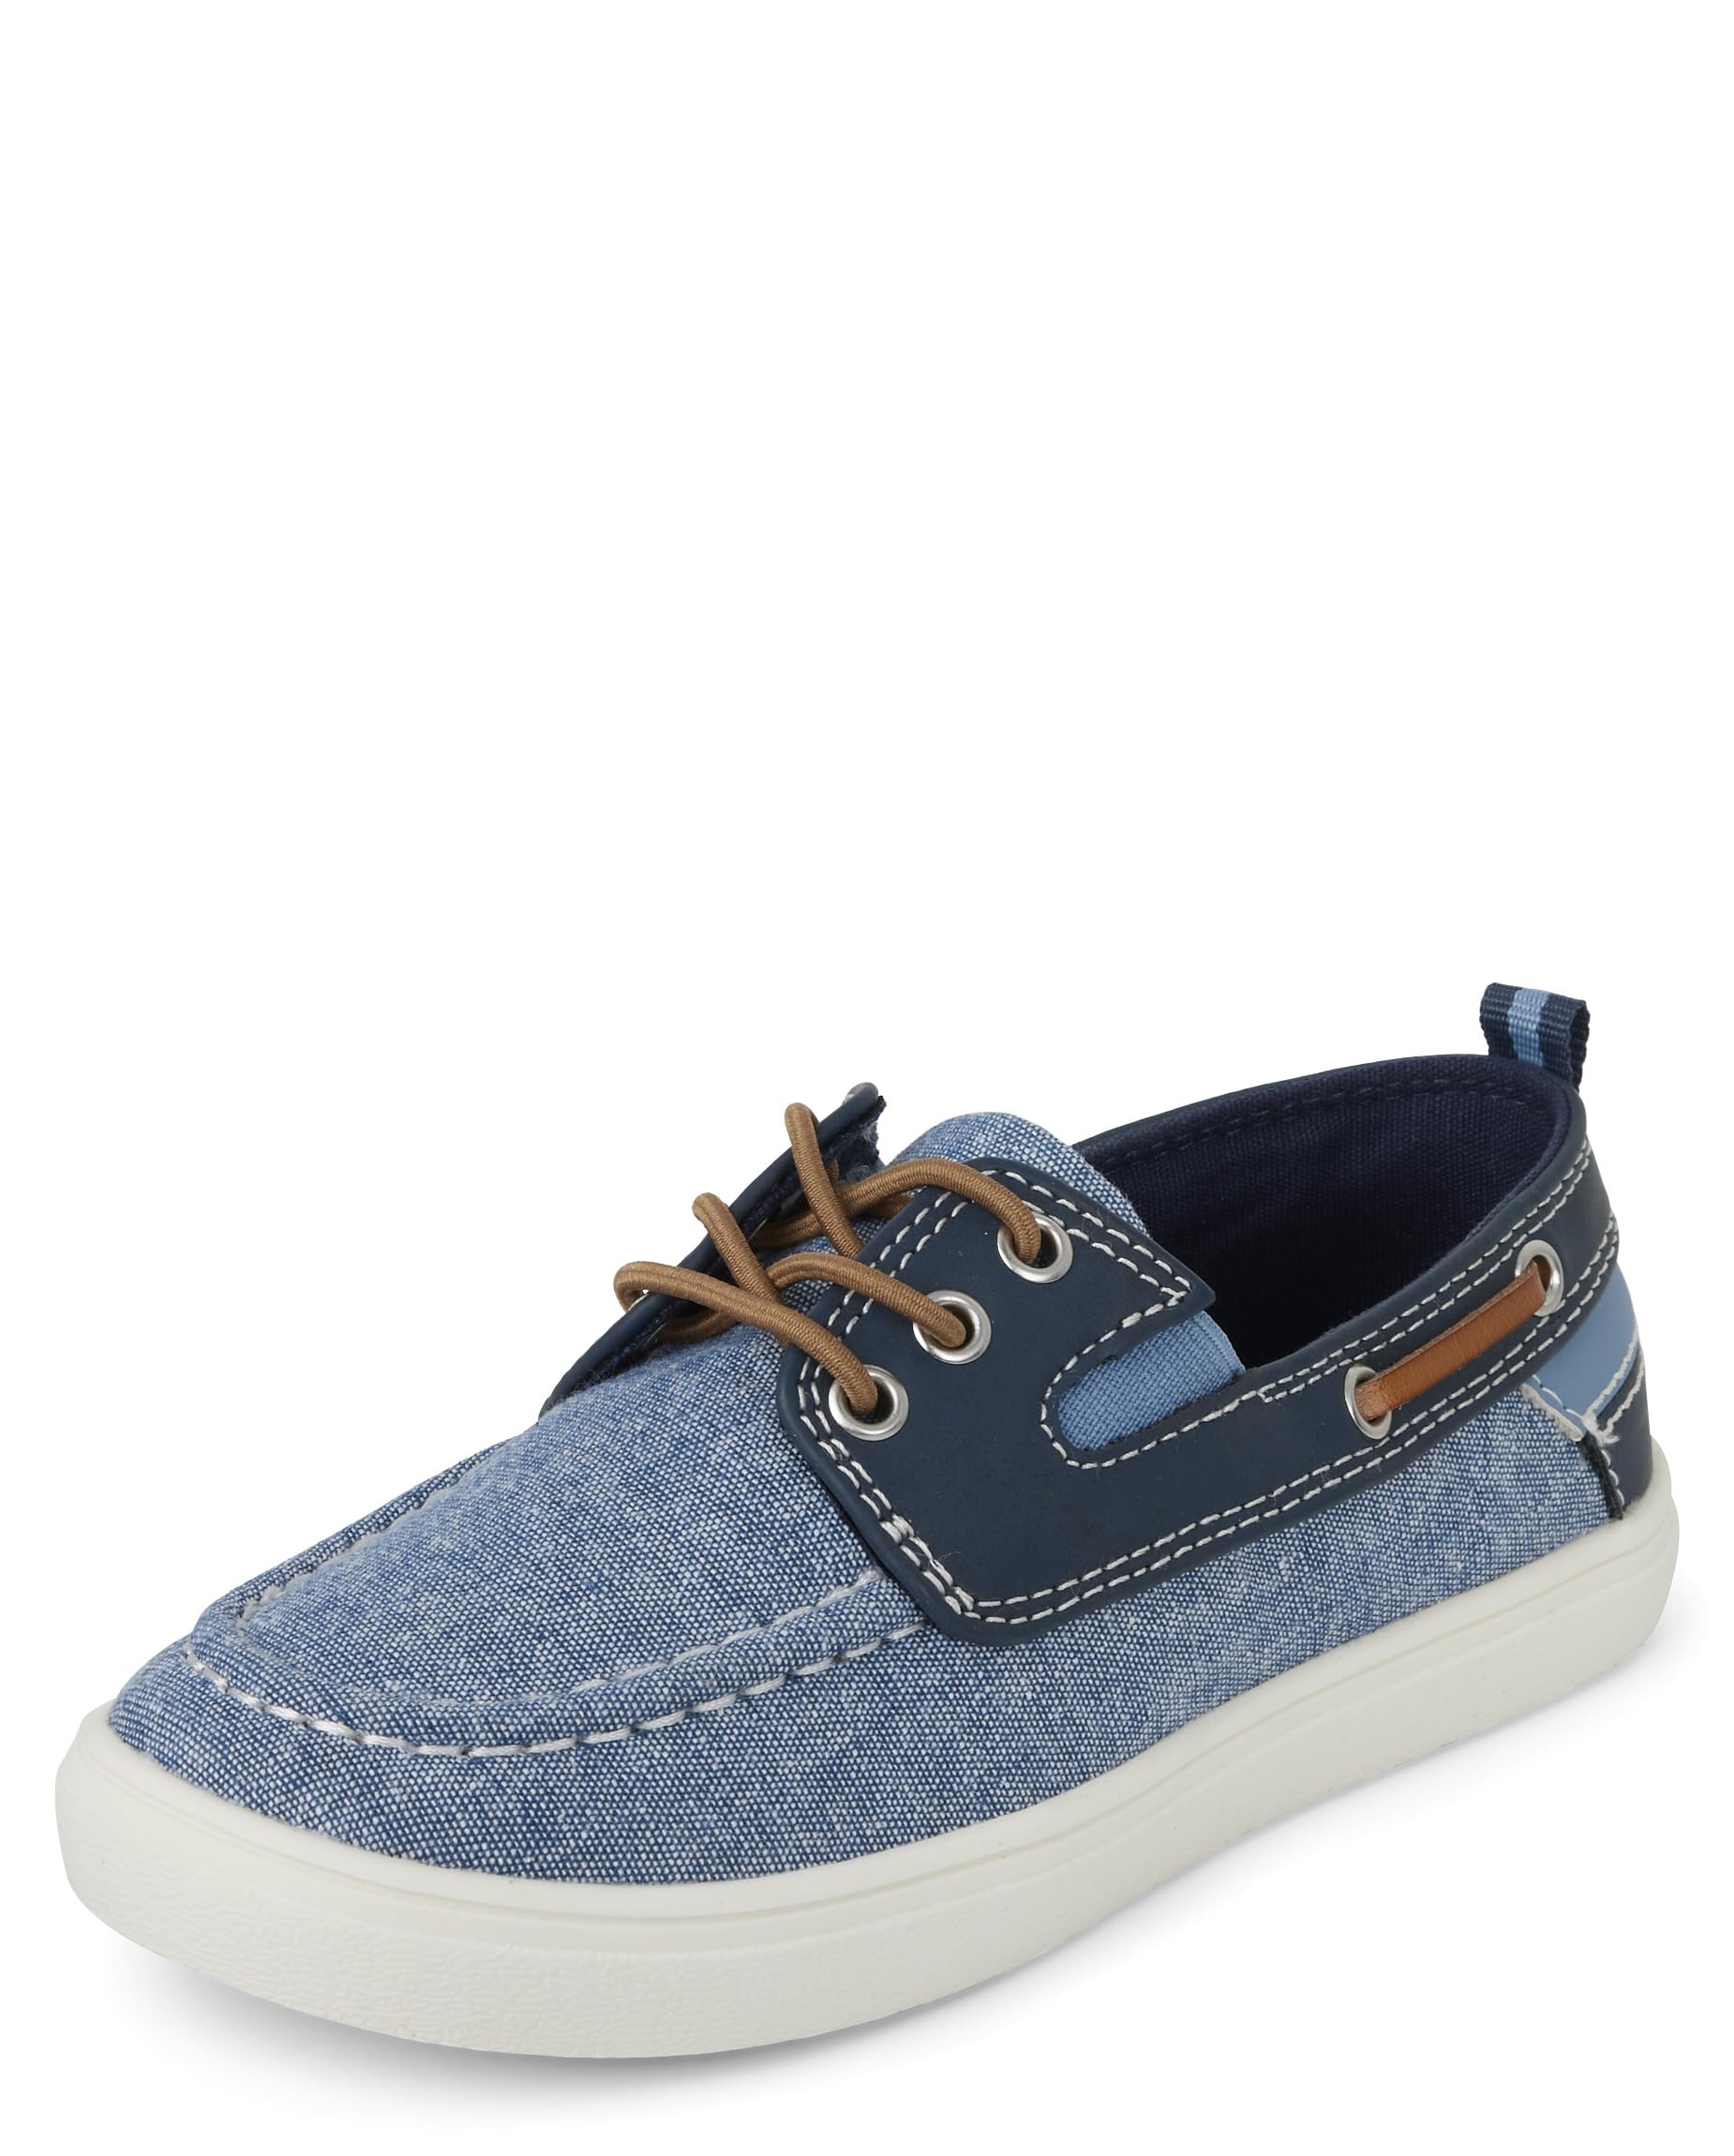 The Children's Place Boy's Slip on Boat Shoes